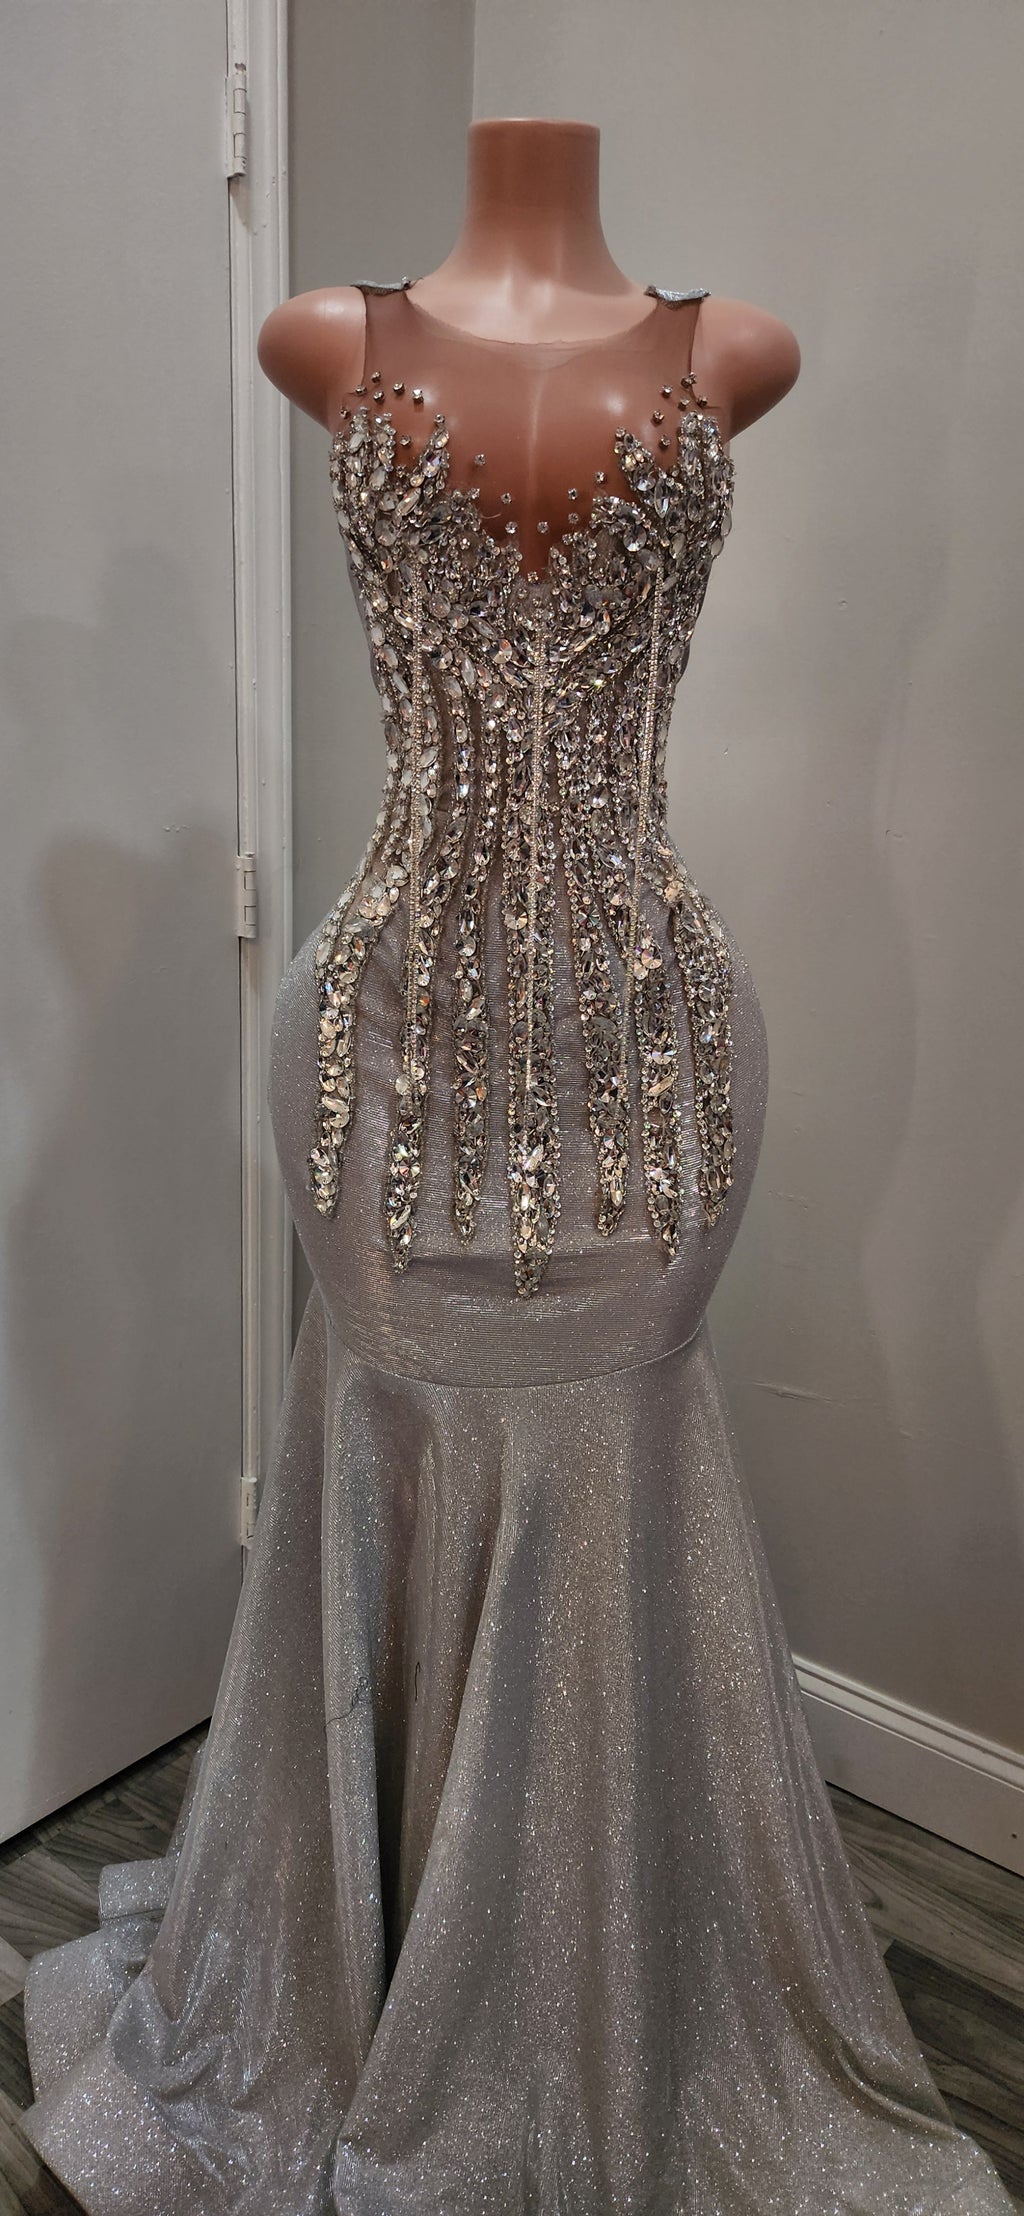 SILVER SAMPLE DRESS( SOLD OUT)